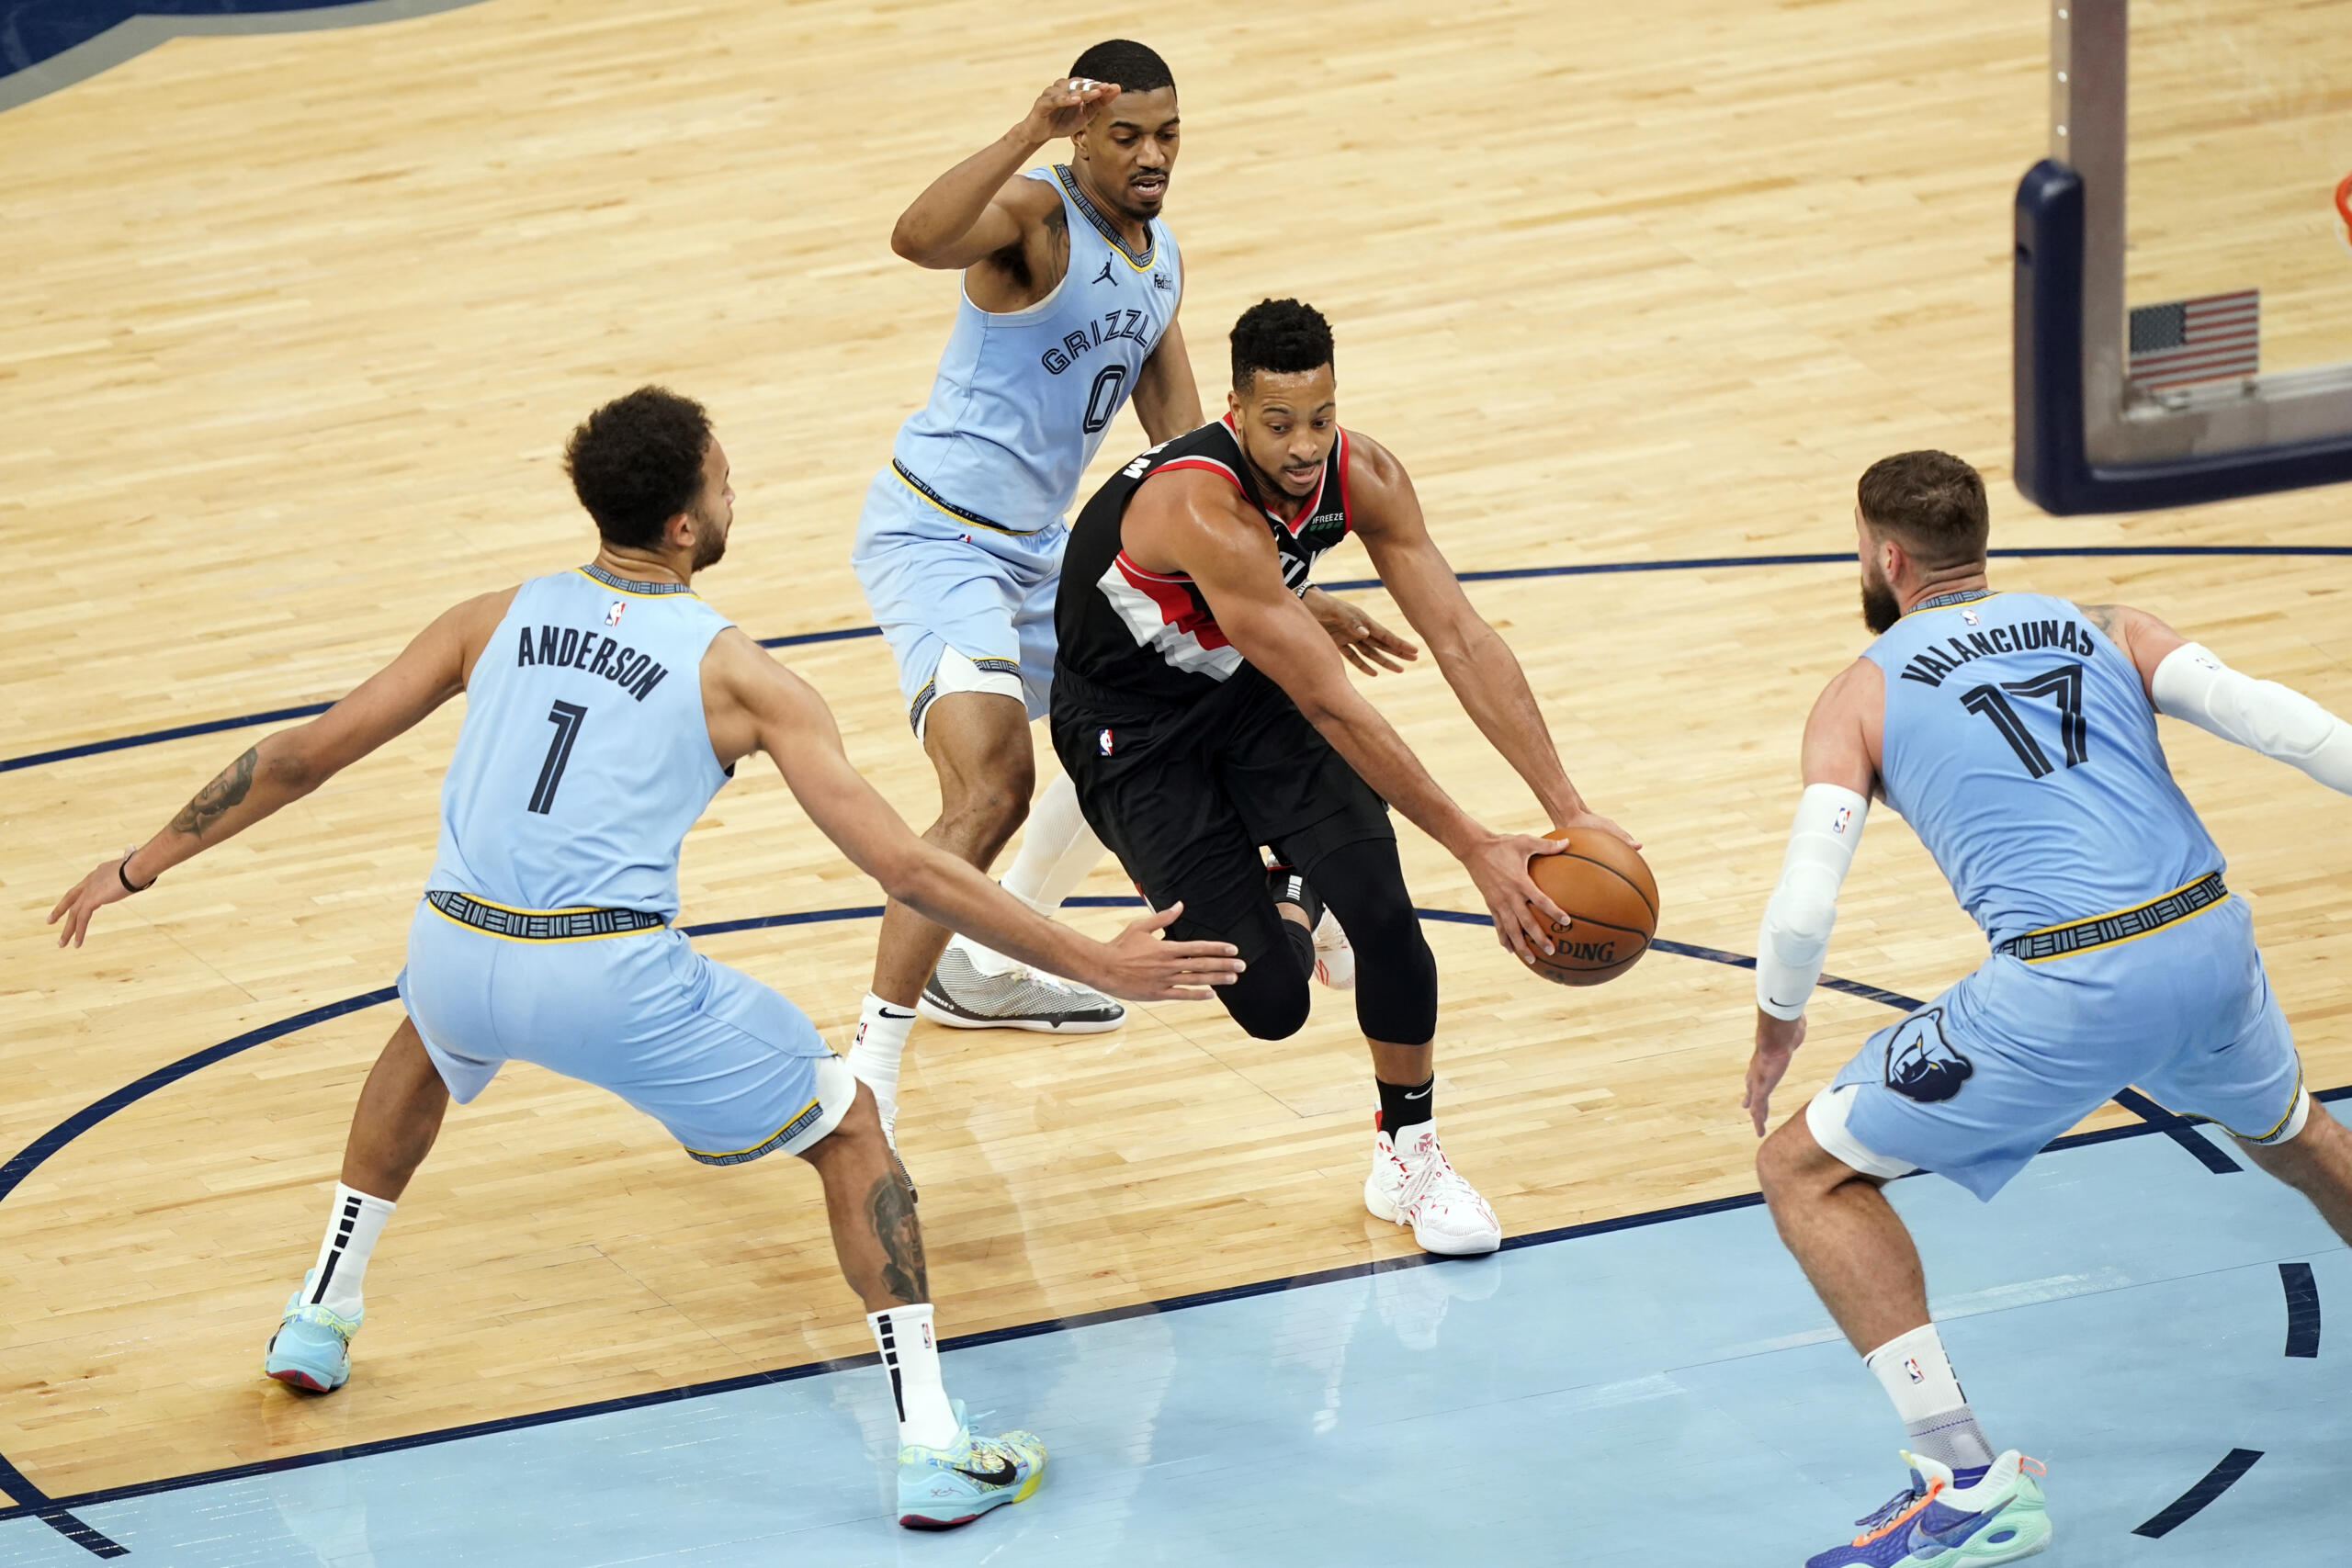 Portland Trail Blazers' CJ McCollum, center, drives between Memphis Grizzlies' defenders Kyle Anderson (1), De'Anthony Melton (0) and Jonas Valanciunas (17) in the second half of an NBA basketball game Wednesday, April 28, 2021, in Memphis, Tenn.